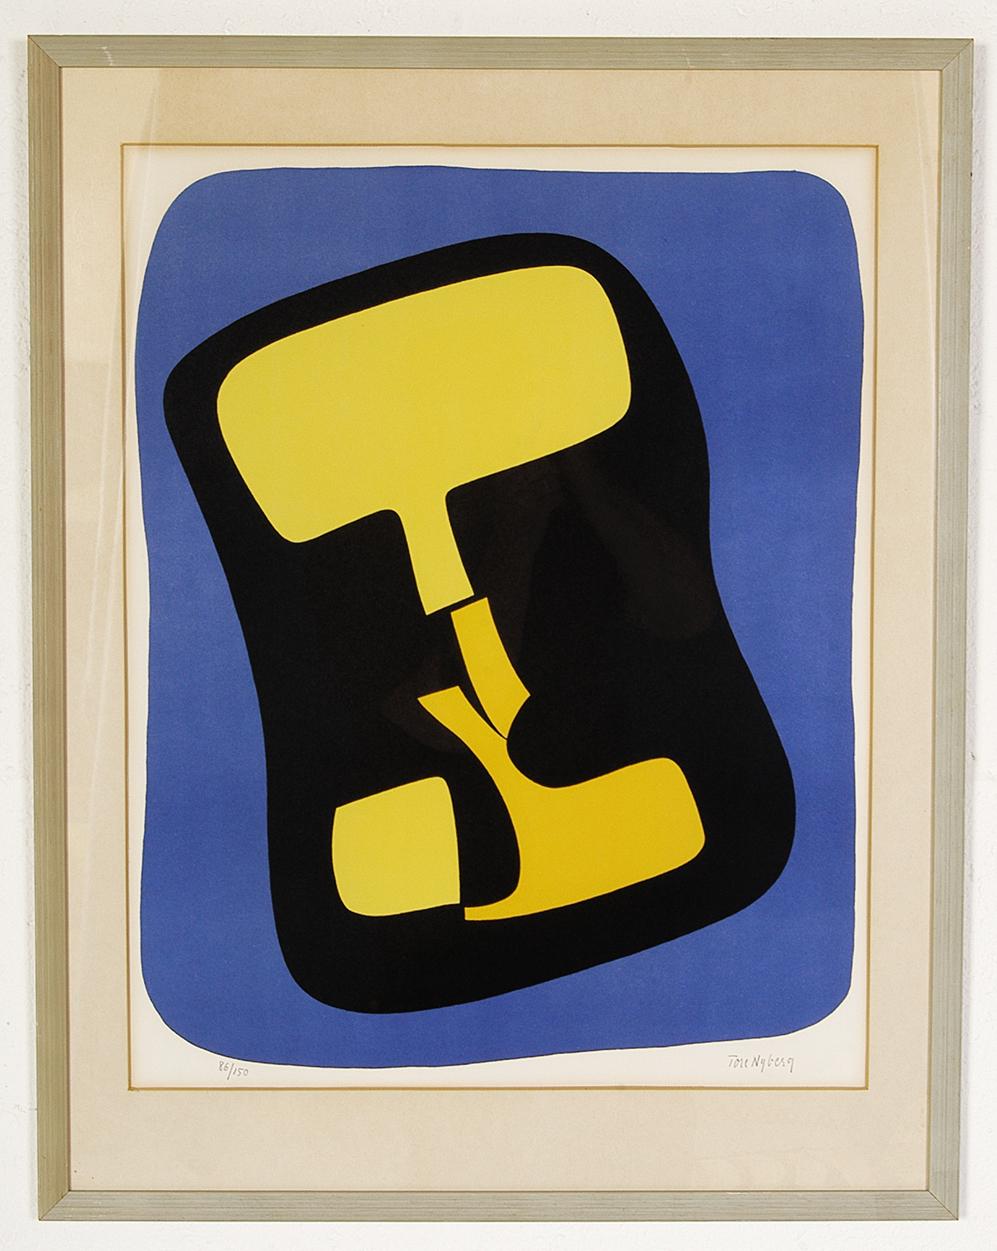 Terrific framed limited edition ‘Composition in Blue & Yellow’ Printed in 1968 by Swedish abstract artist Tore Nyberg (1911 – 1993). Signed and numbered in pencil in the margin ‘Tore Nyberg 86/150’ original gallery stamp verso. An earlier numbered